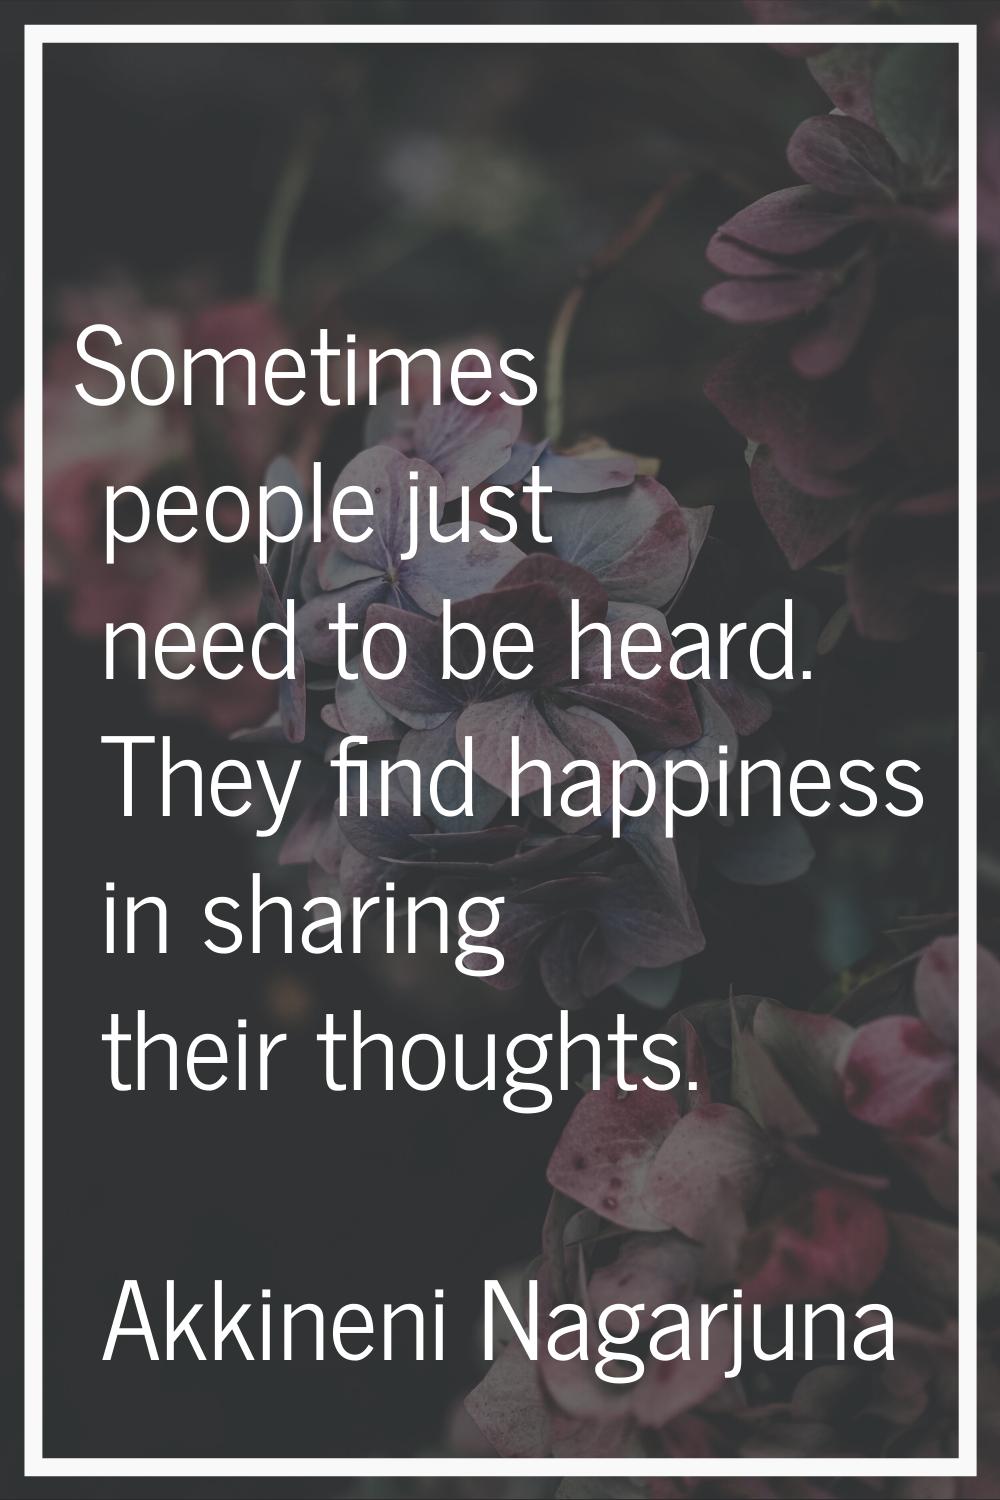 Sometimes people just need to be heard. They find happiness in sharing their thoughts.